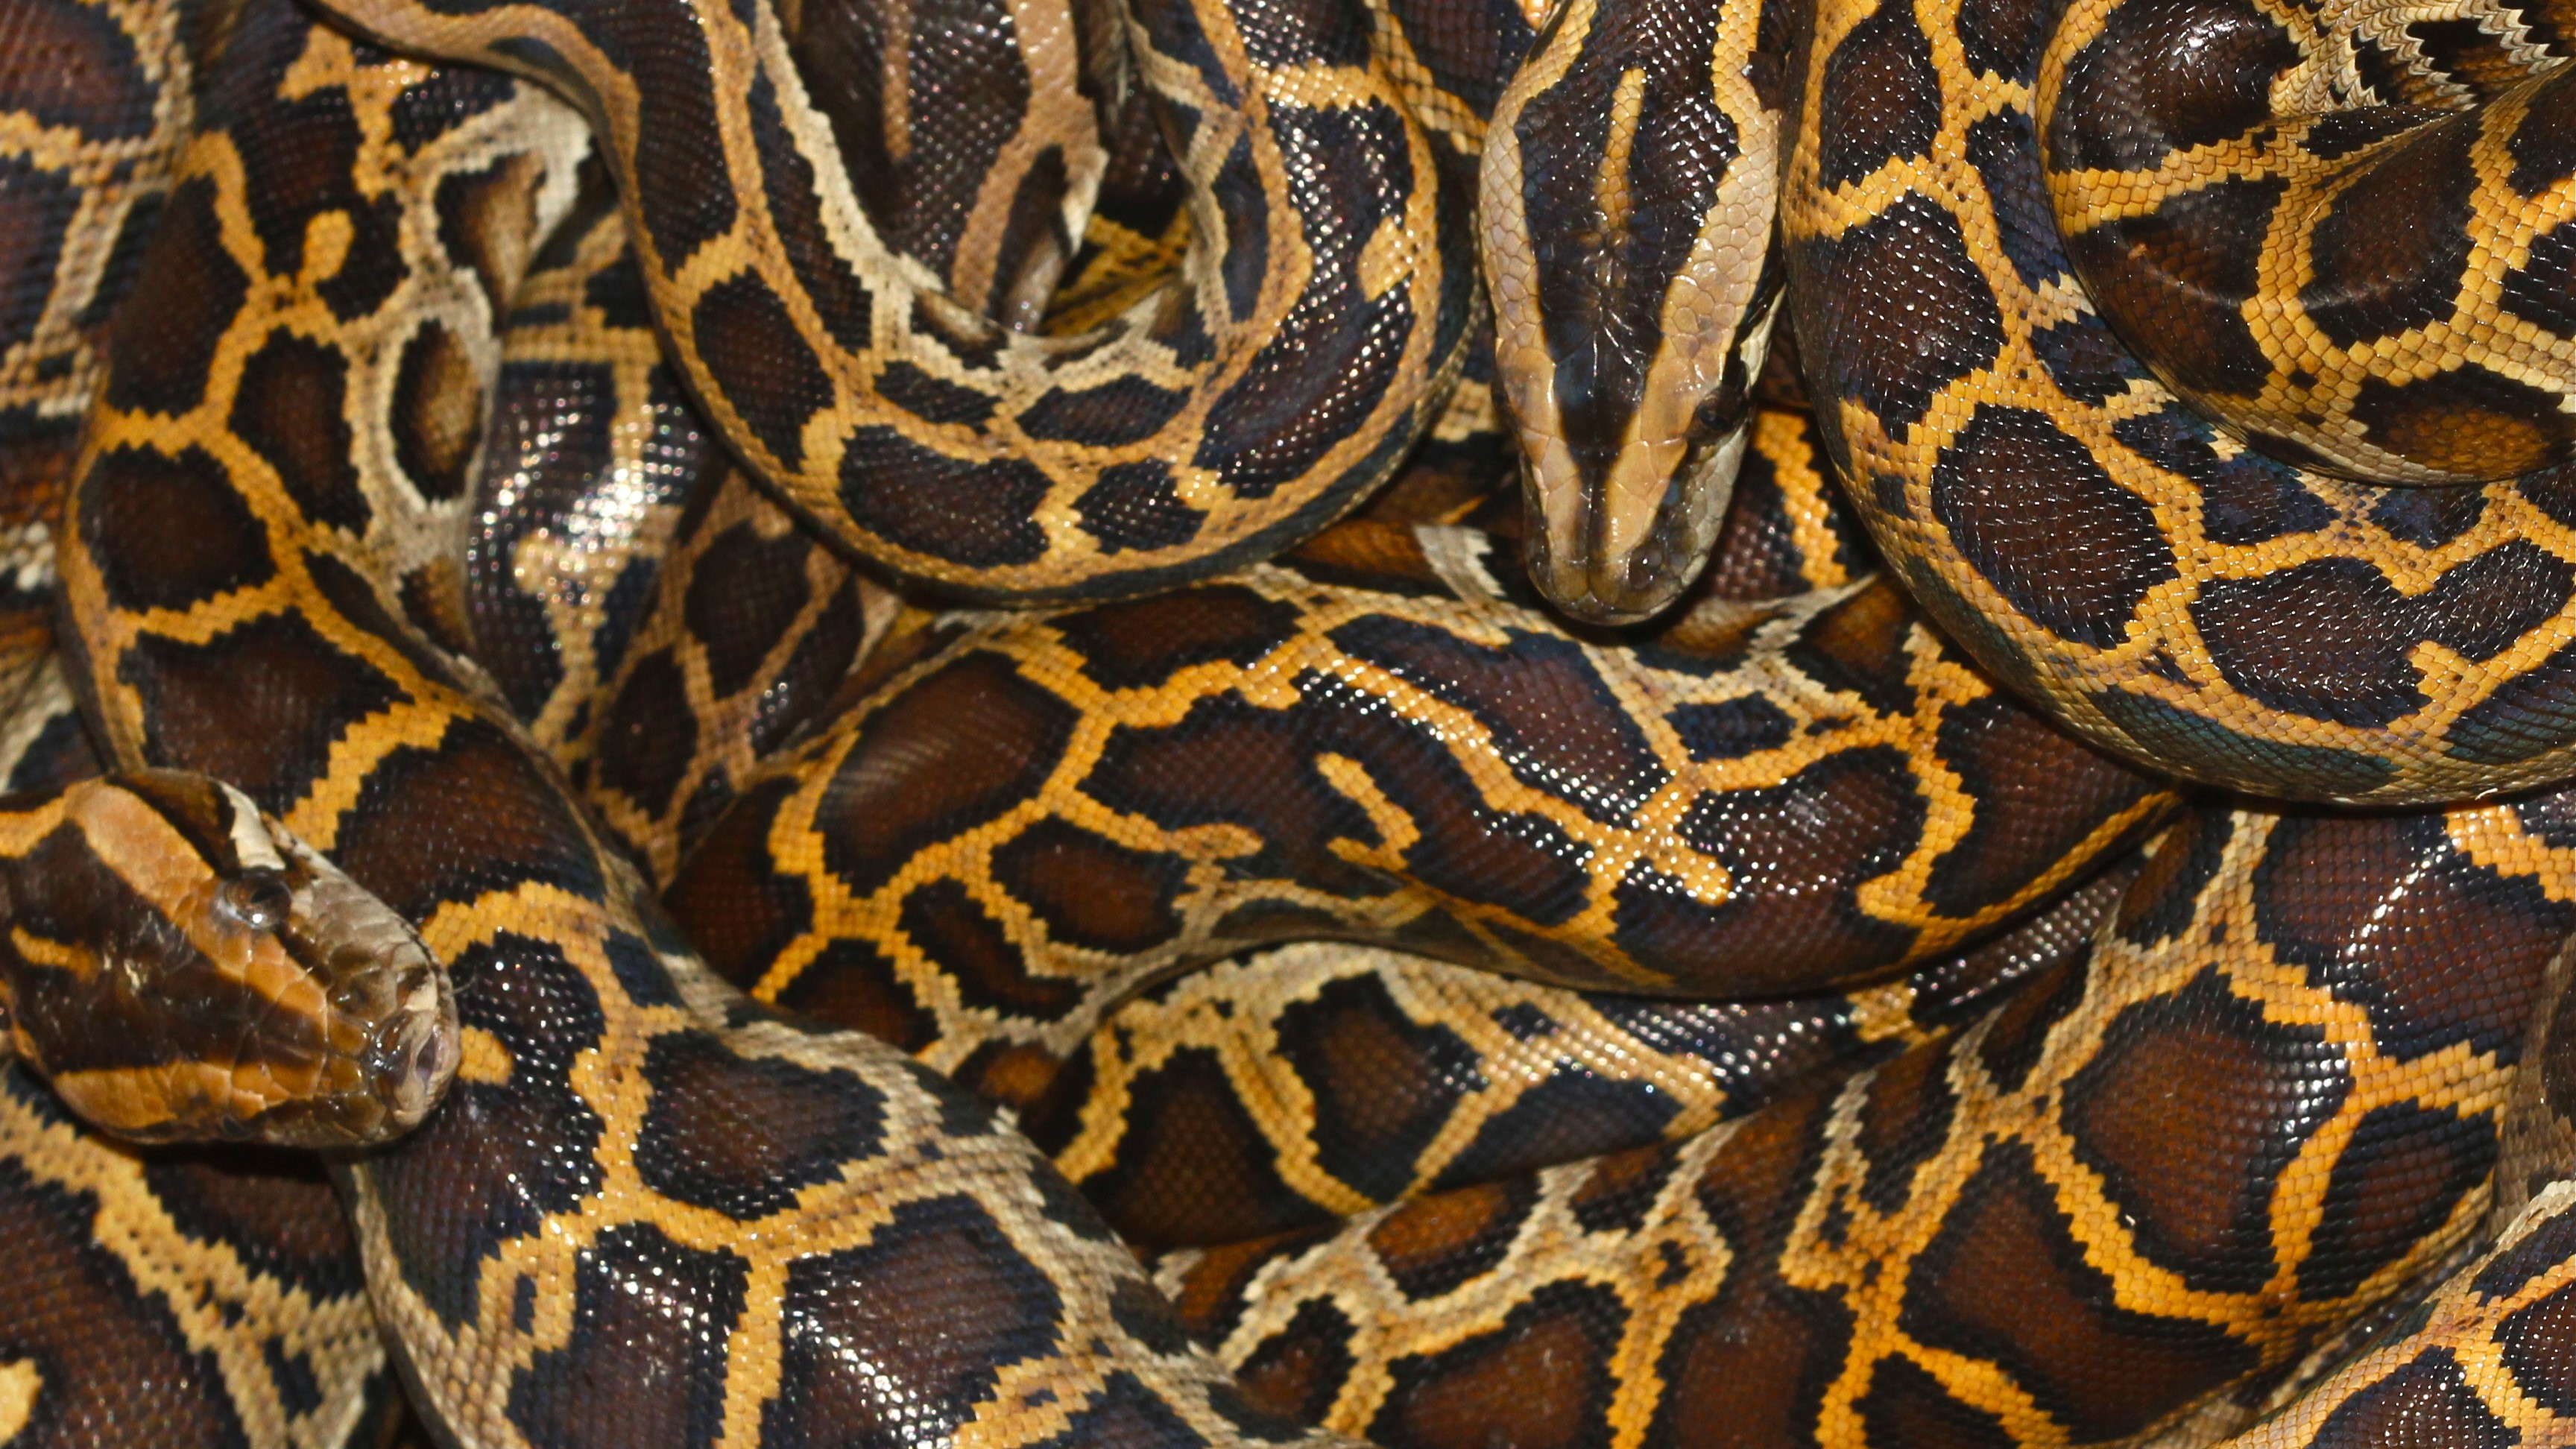 Pythons one of top of another in a snake farm.